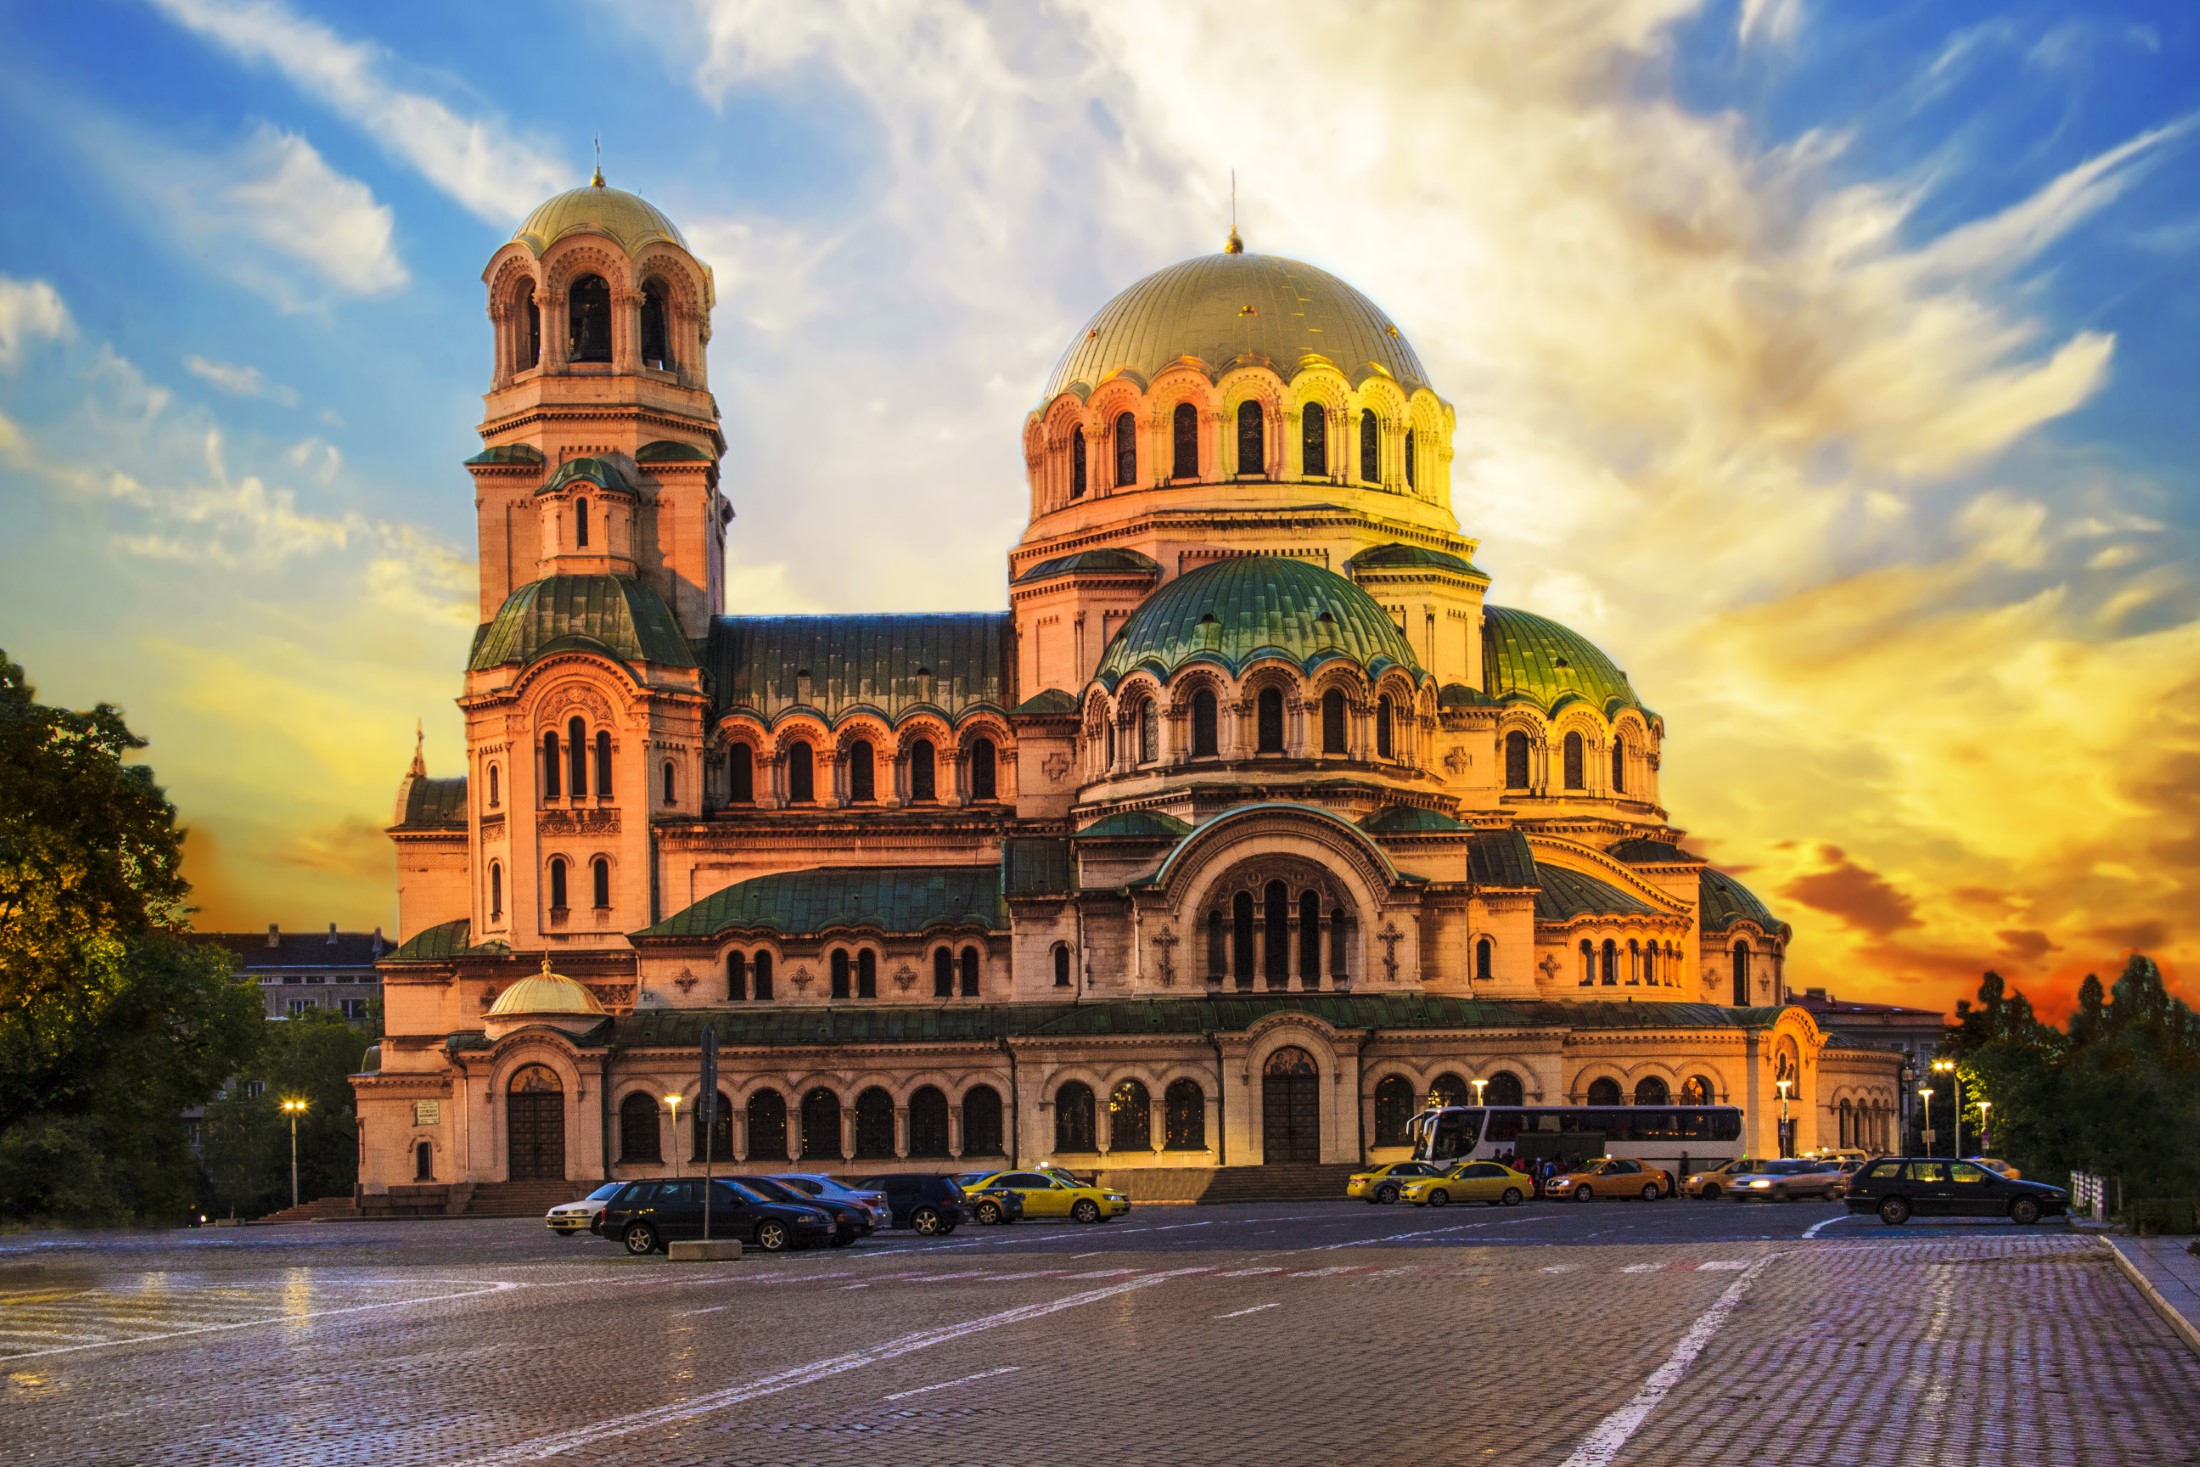 A beautiful view of the Alexander Nevsky Cathedral in Sofia, Bulgaria on a sunset